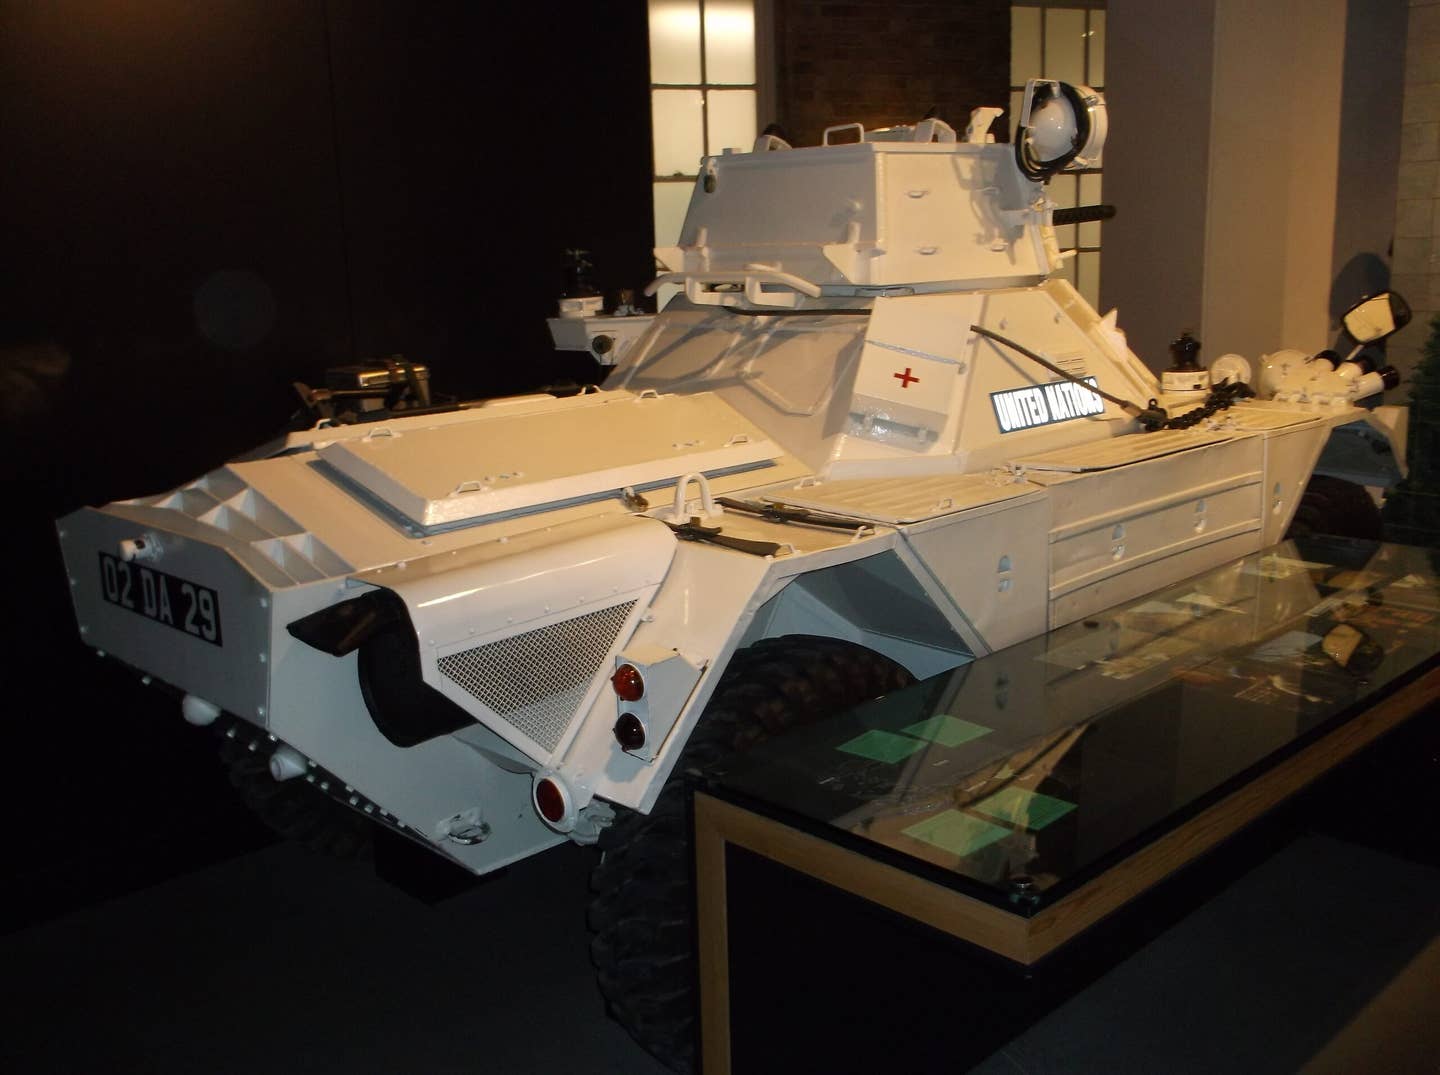 A turreted Ferret scout car, previously used on peacekeeping duties in Cyprus, on display at the Imperial War Museum, London. This gives a fairly good idea of the kind of levels of armor protection provided to the occupants. <em>Harry Mitchell/Wikimedia Commons</em>